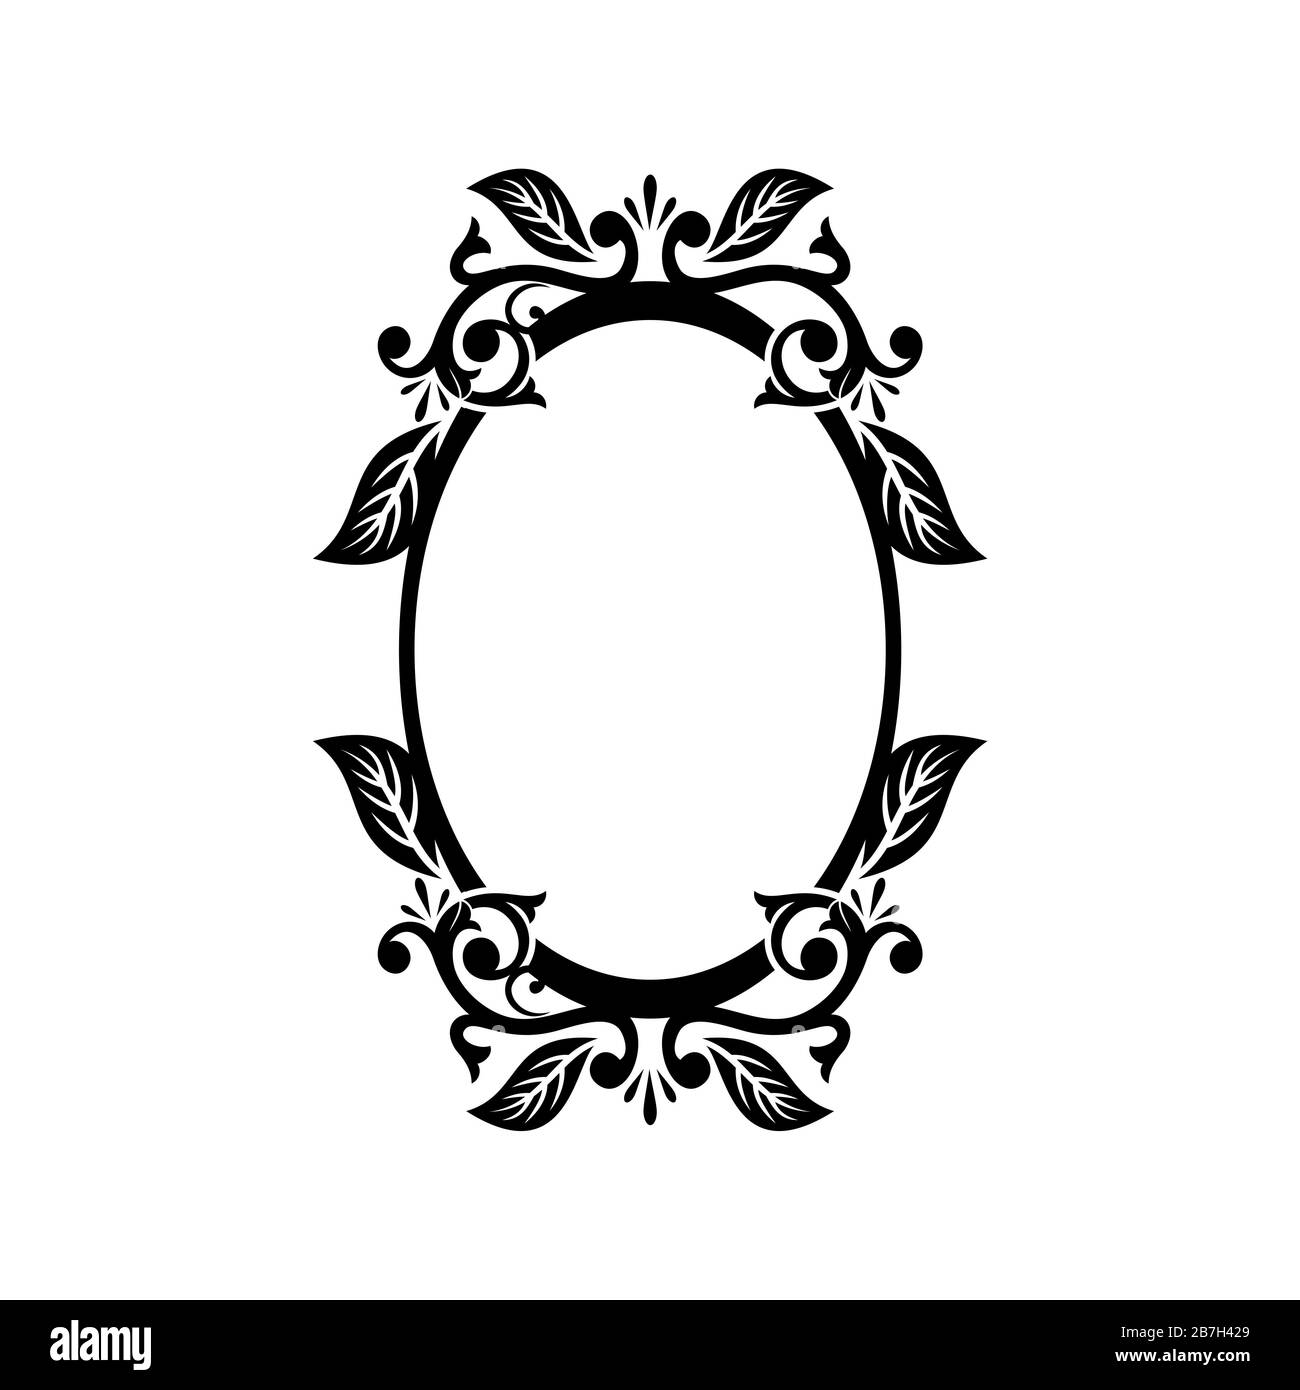 Vector Vintage Border Frame Logo Engraving with Retro Ornament Pattern in  Antique Rococo Style Decorative Design Stock Vector - Illustration of  frame, beauty: 72627290